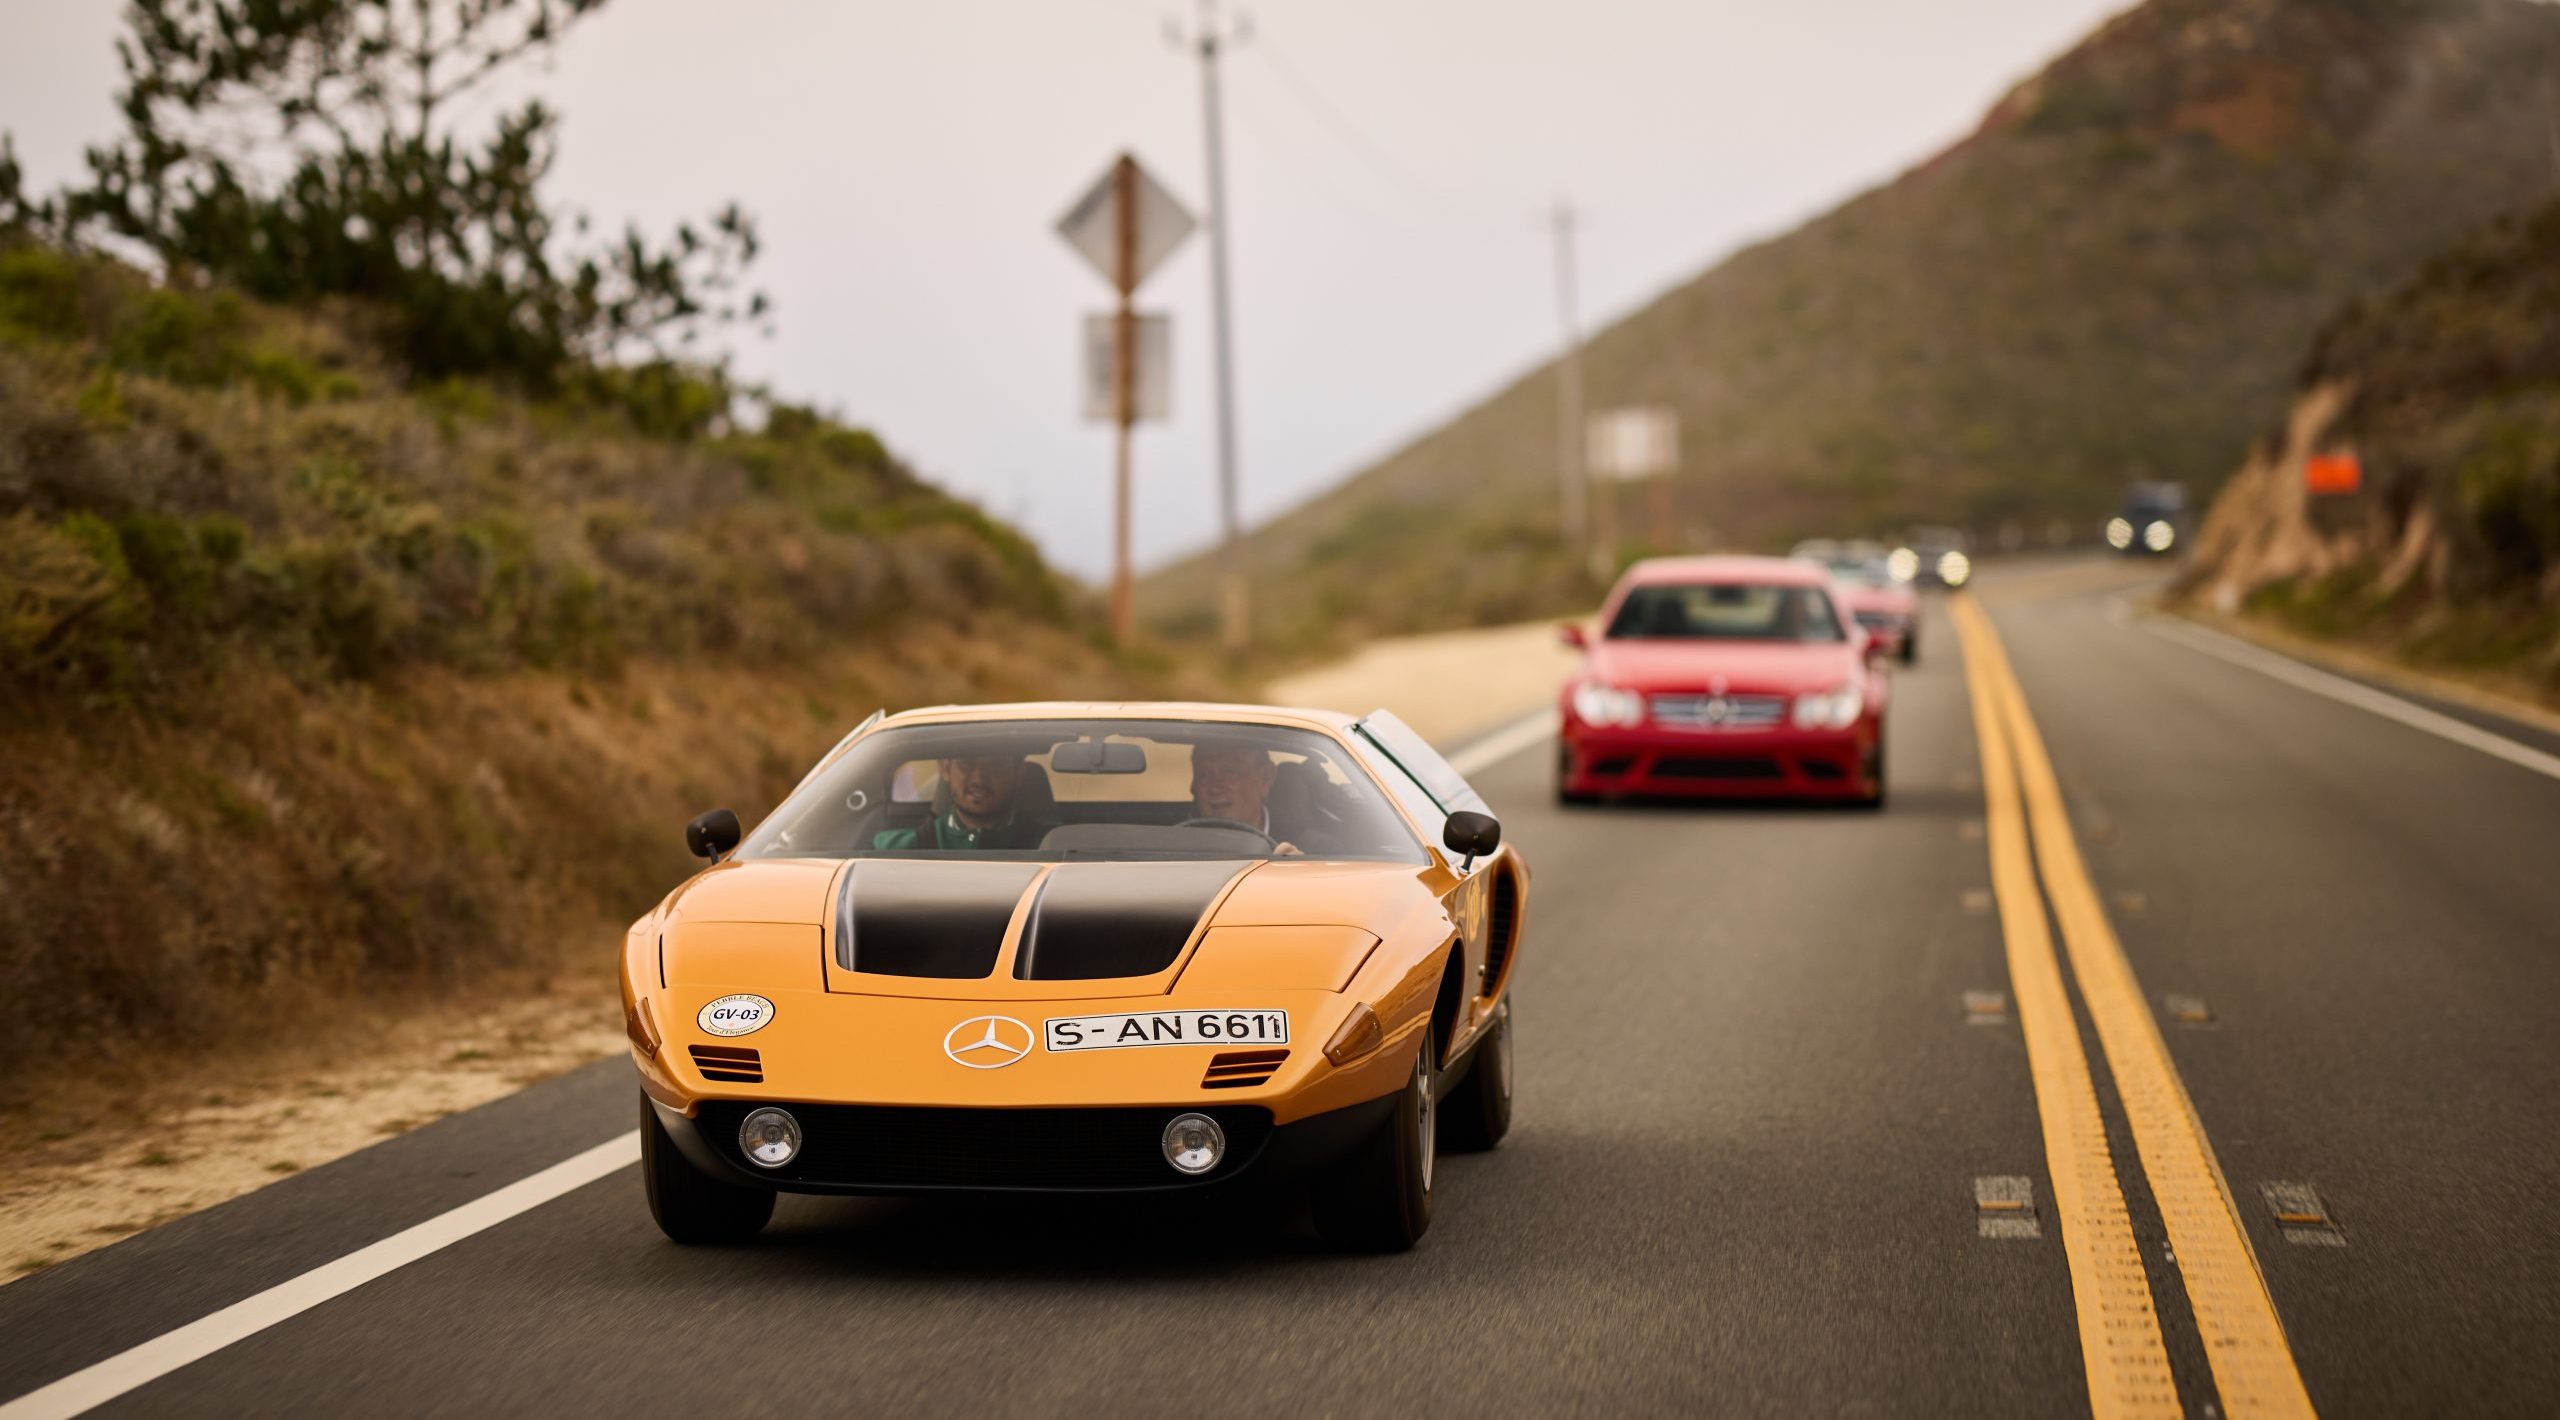 Riding in a 1970 Mercedes-Benz C111 is the ultimate historical tease